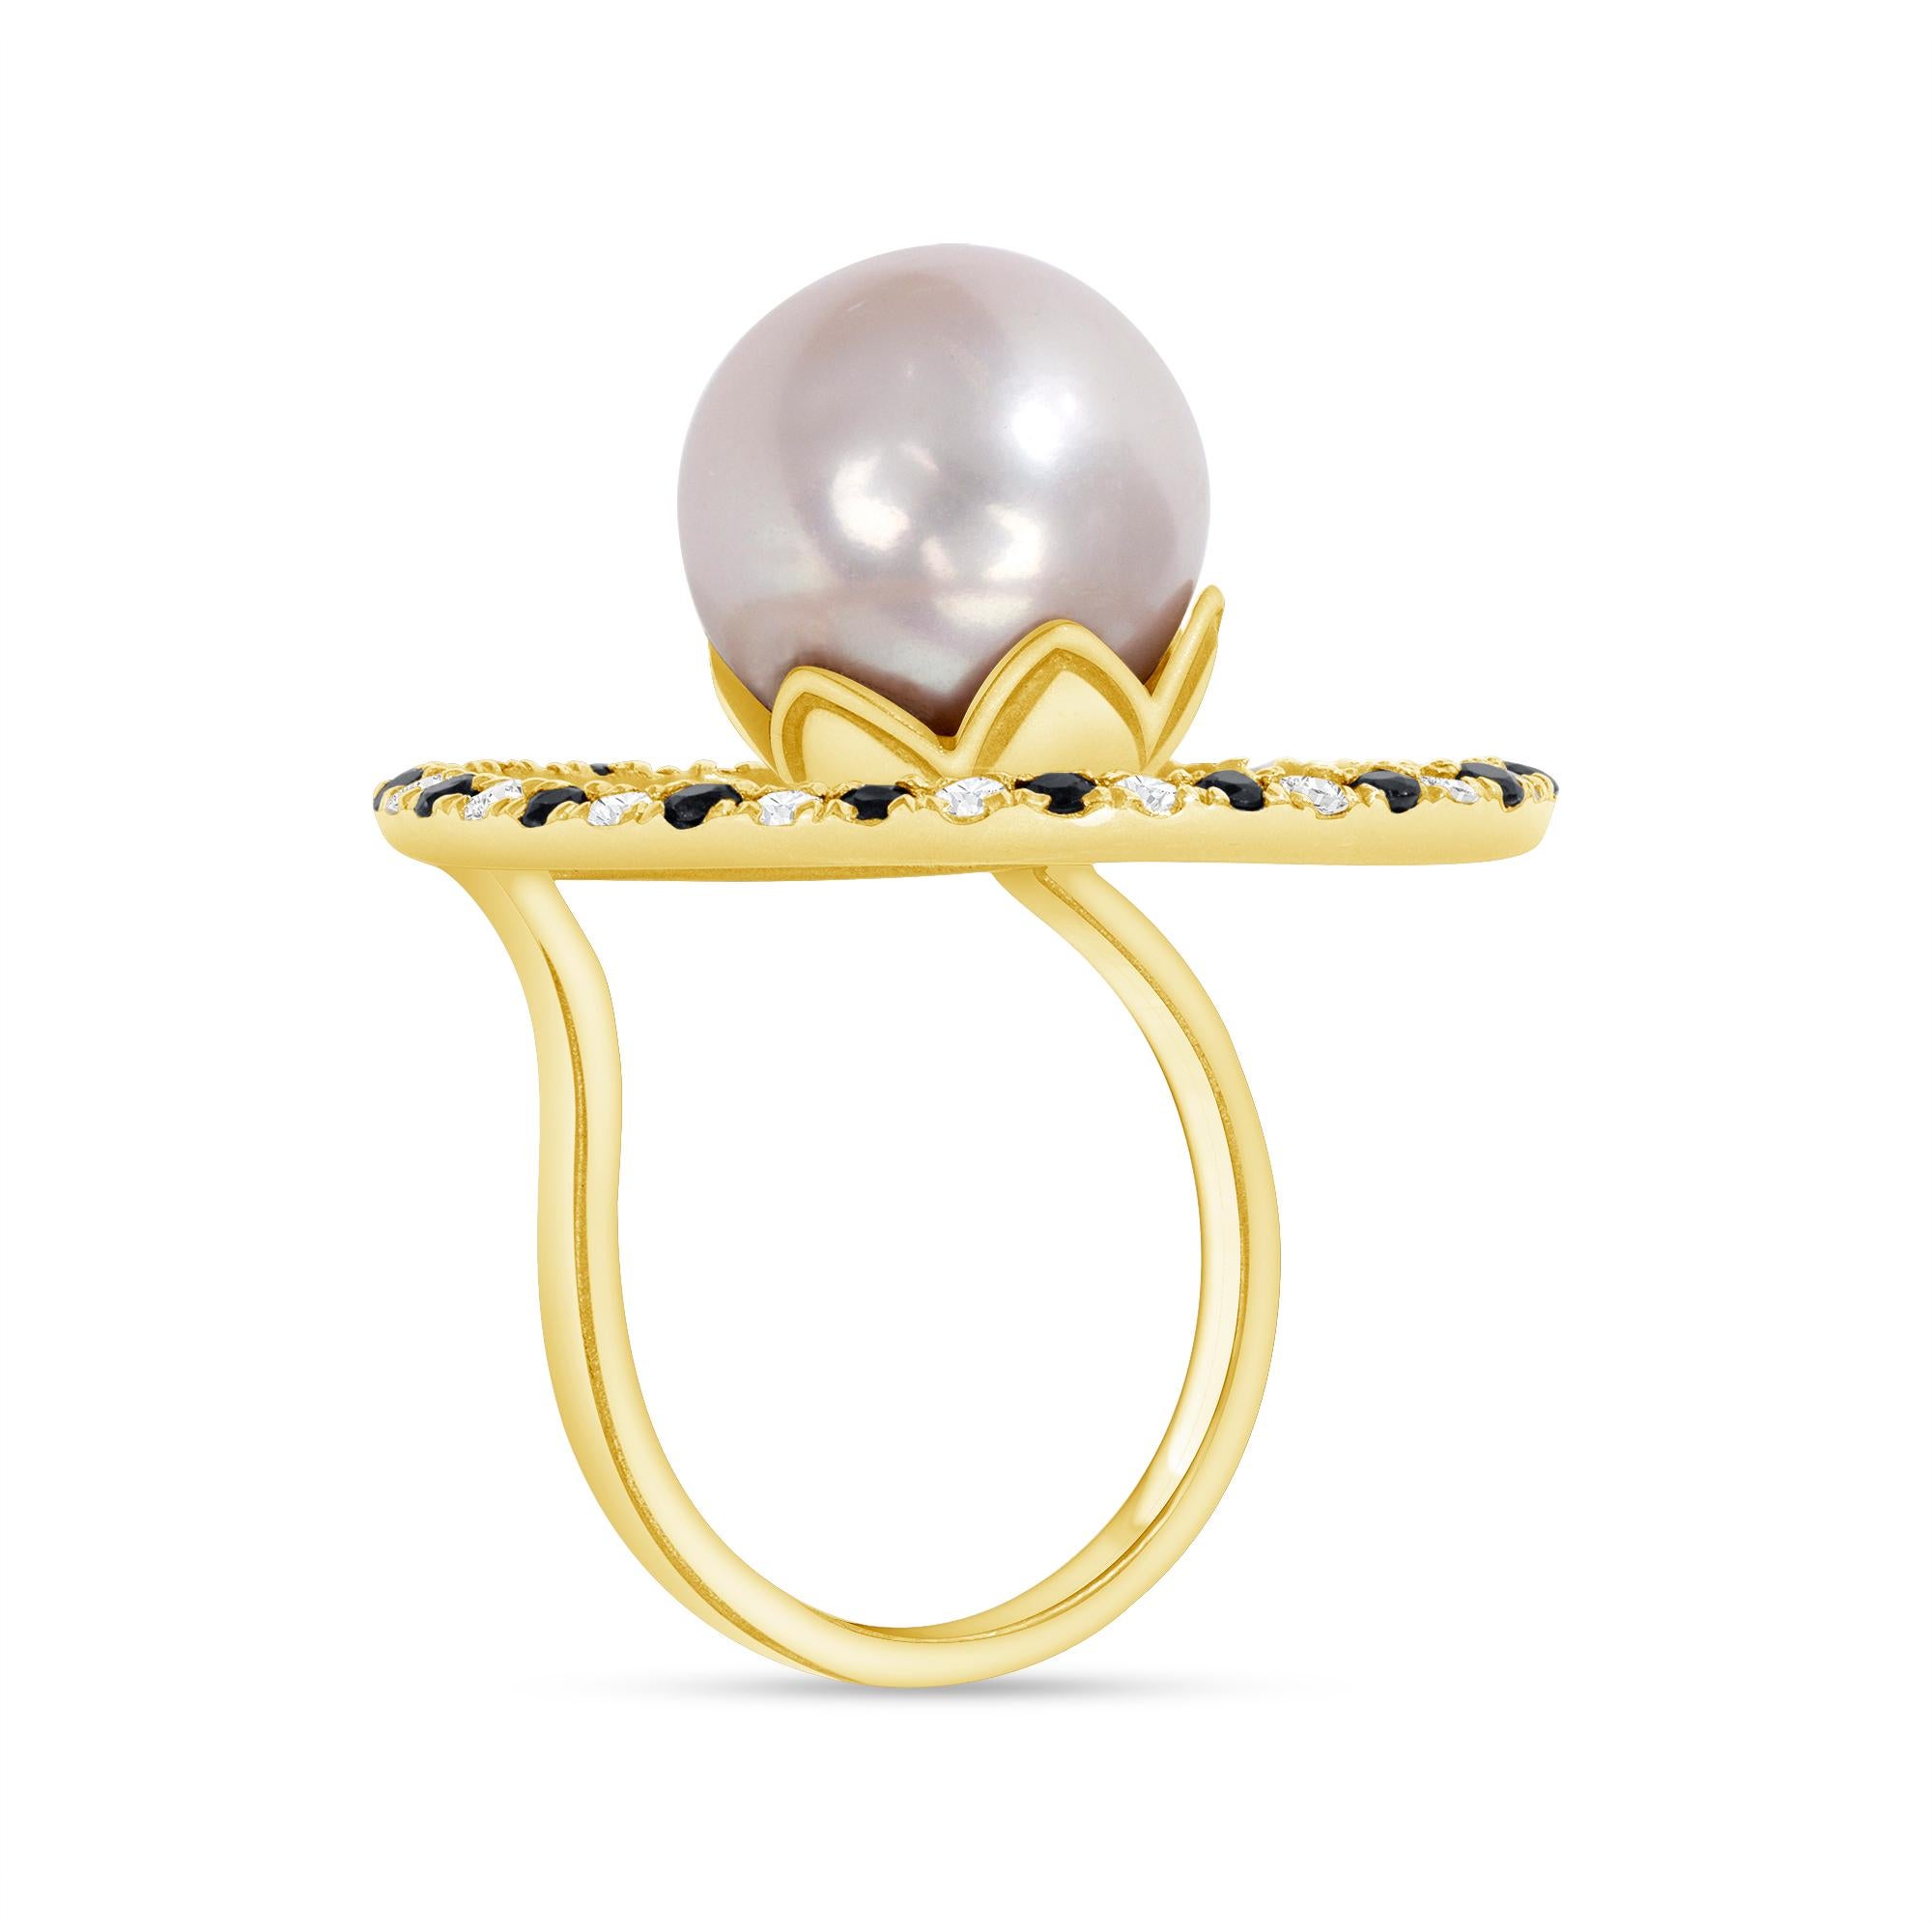 Designed by award-winning artist Brenda Smith, this size 7 to 7.5 cocktail ring is hand fabricated with 5.01 grams of 18-karat yellow gold. Surrounding the “floating” 13.26 millimeter cultured South Sea pearl is a ring of round-cut sapphires and